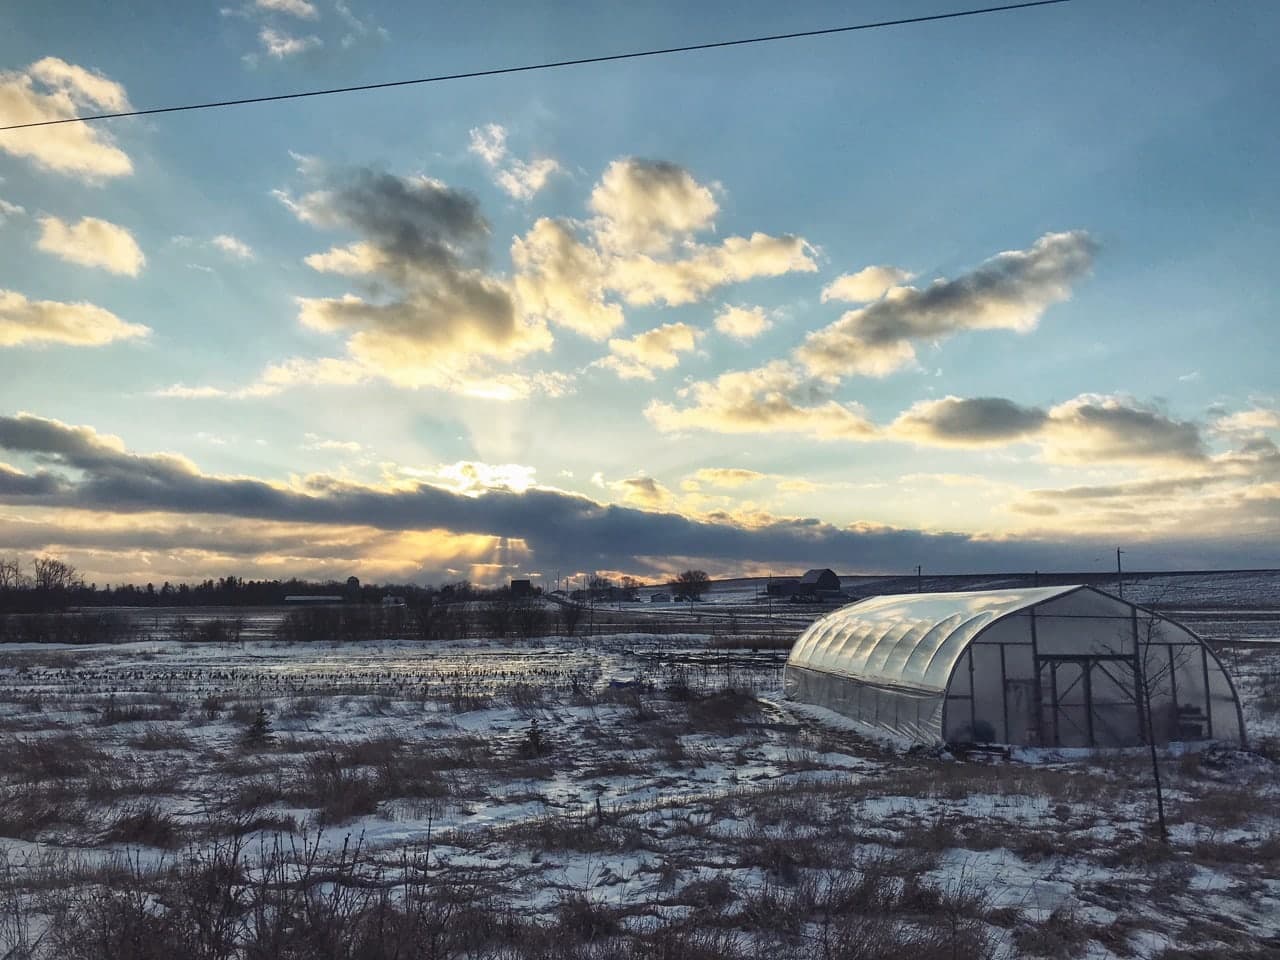 A Greenhouse Standing in an Icy Windswept Field, in front of a glorious sunset